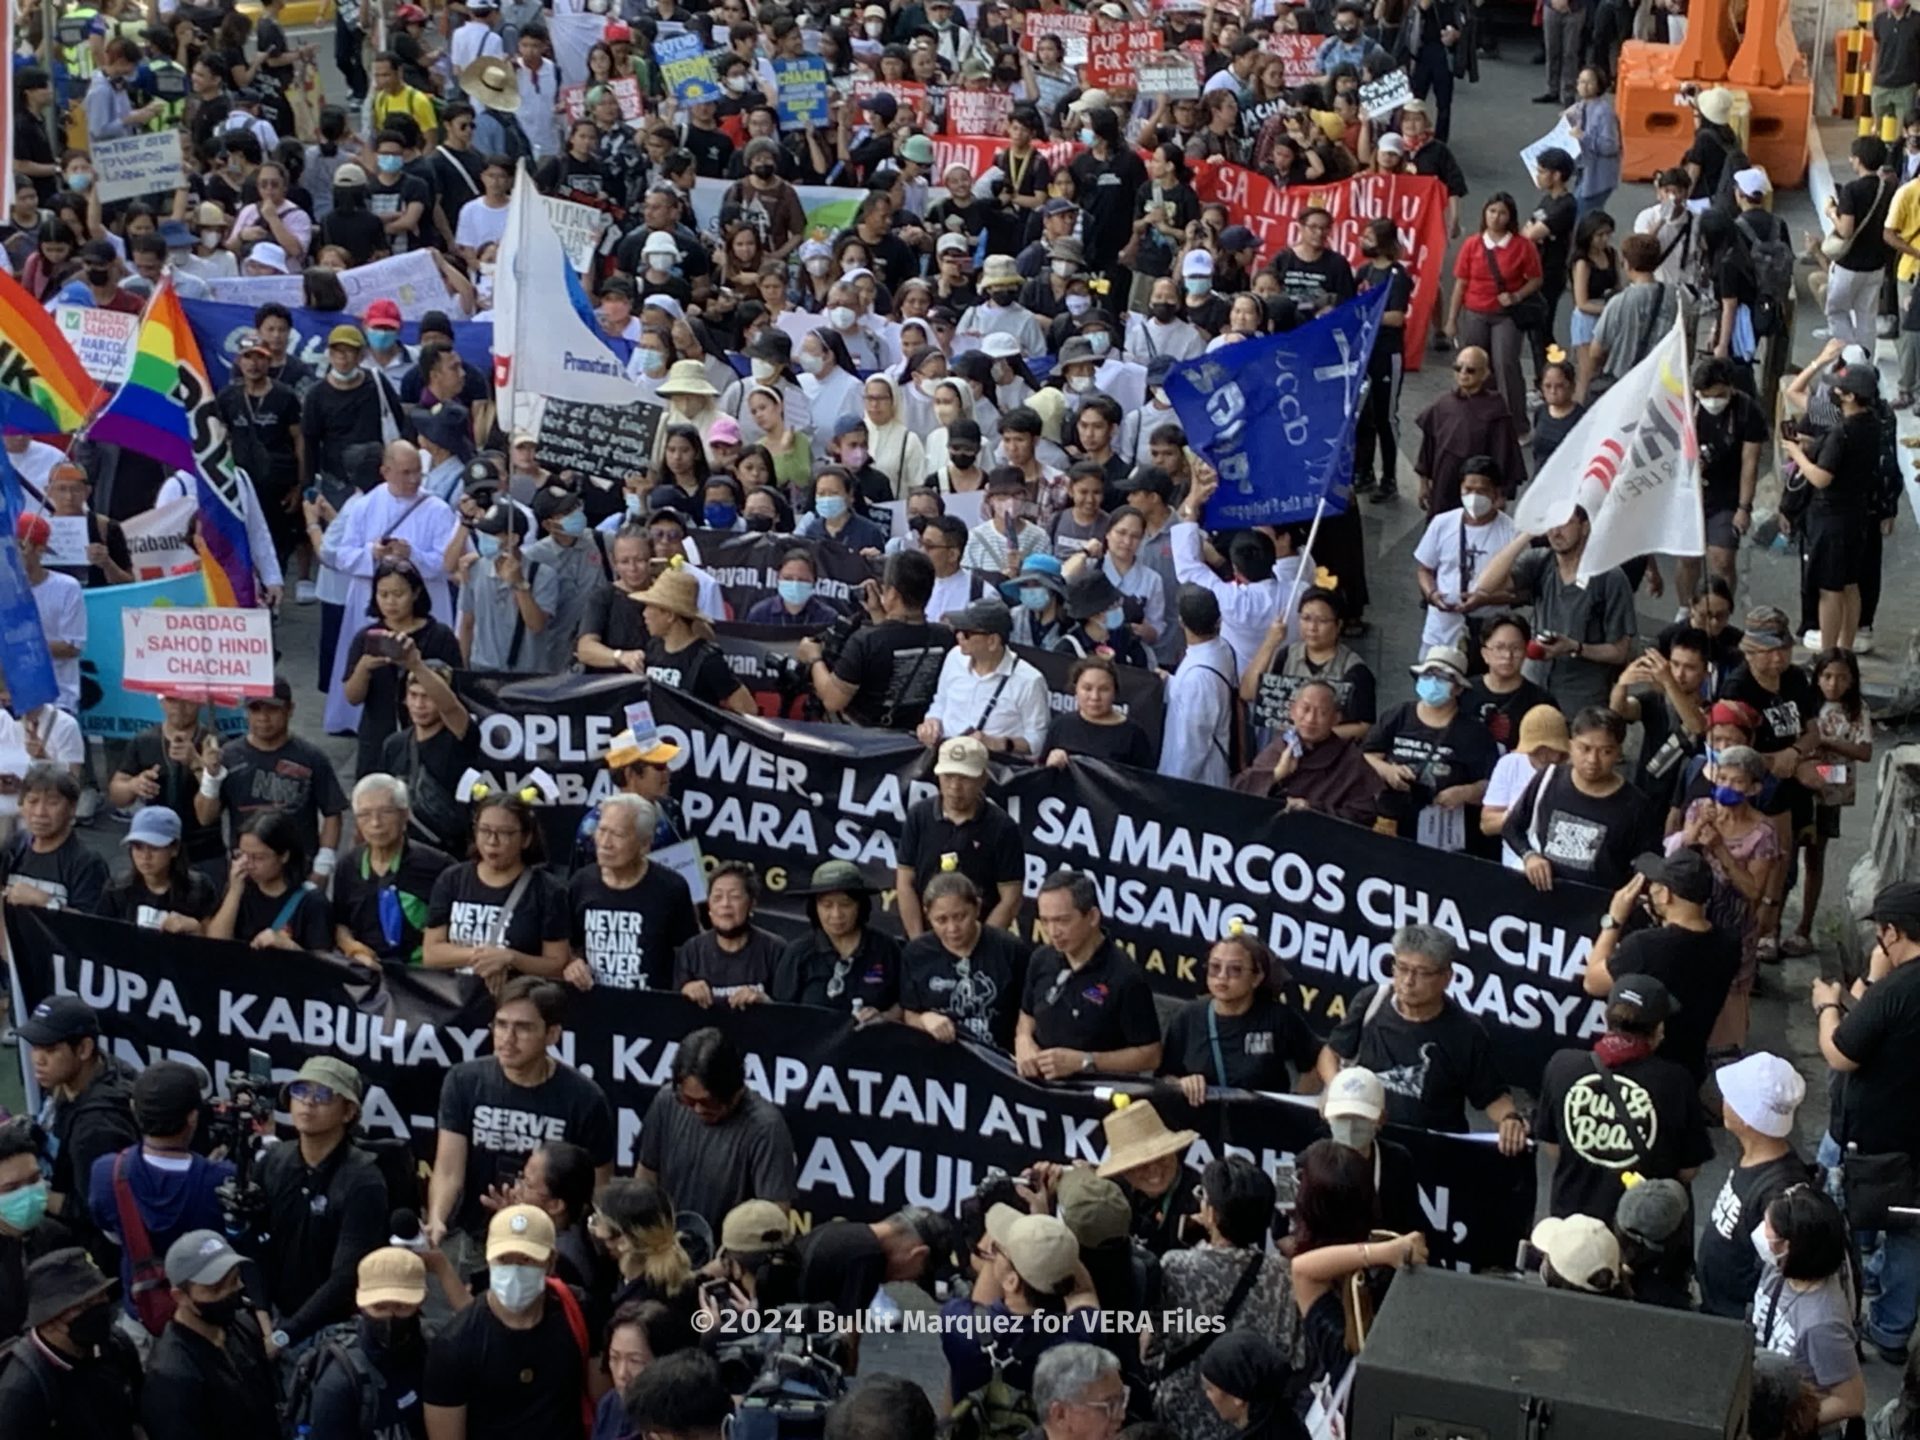 Slogans and placards at the rally showed strong opposition to attempts to change the Constitution that was passed in 1987 following the 1986 restoration of democracy in the country. 10/10 Photo by Bullit Marquez for VERA Files